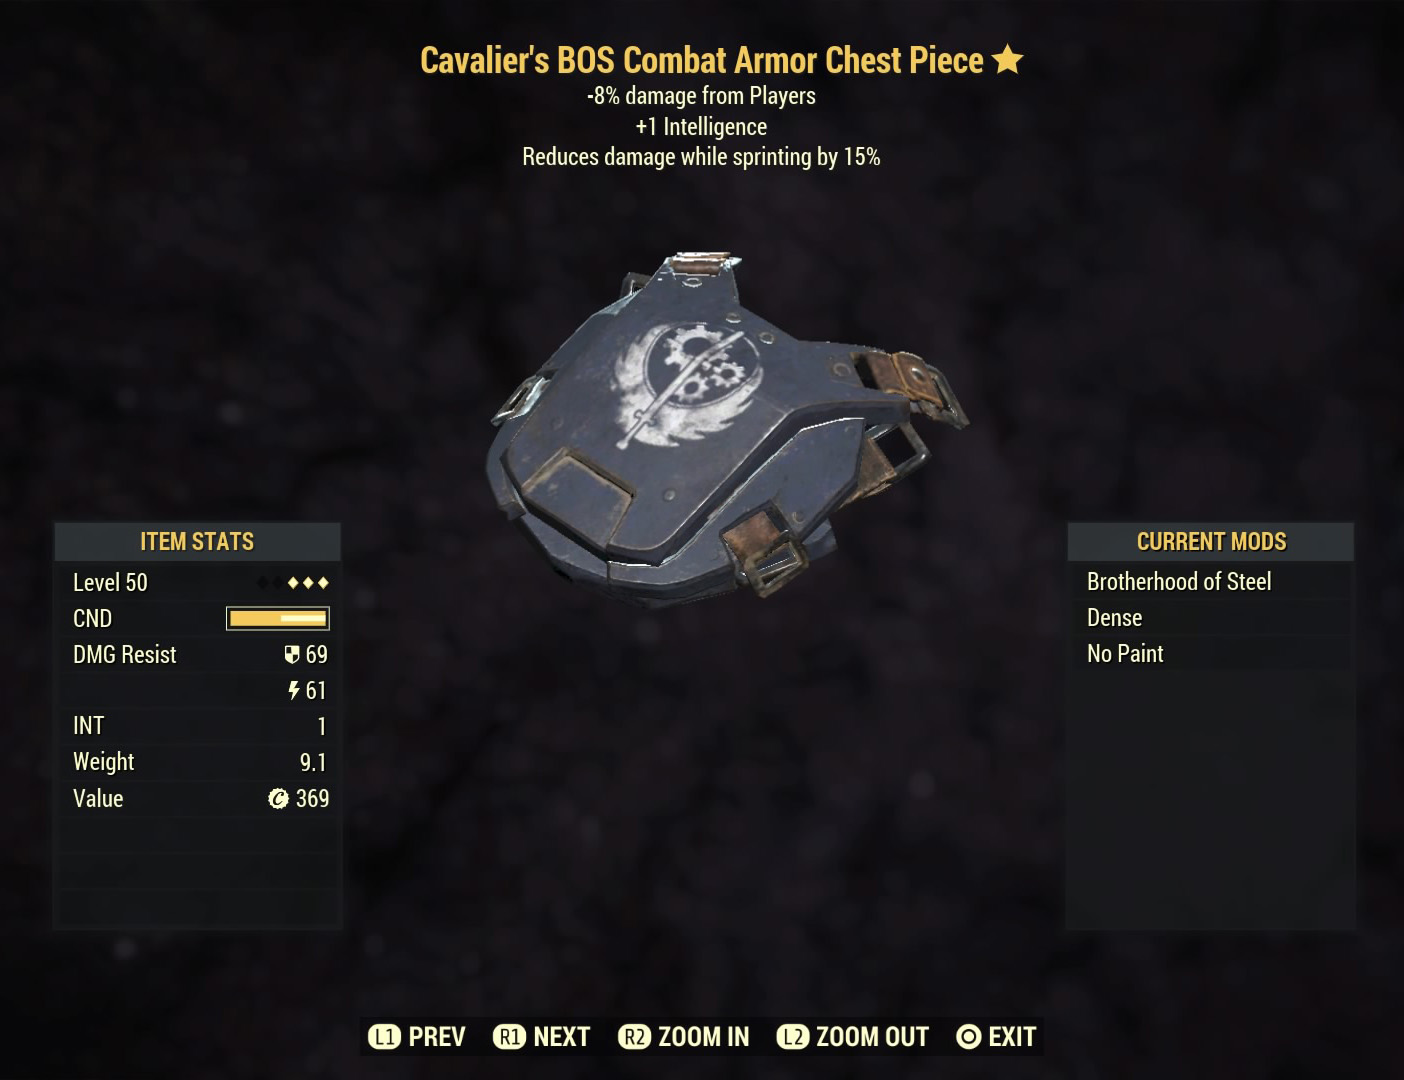 Fallout 76 Cavalier‘s Bos Cambat Armor Chest Priece- Level 45